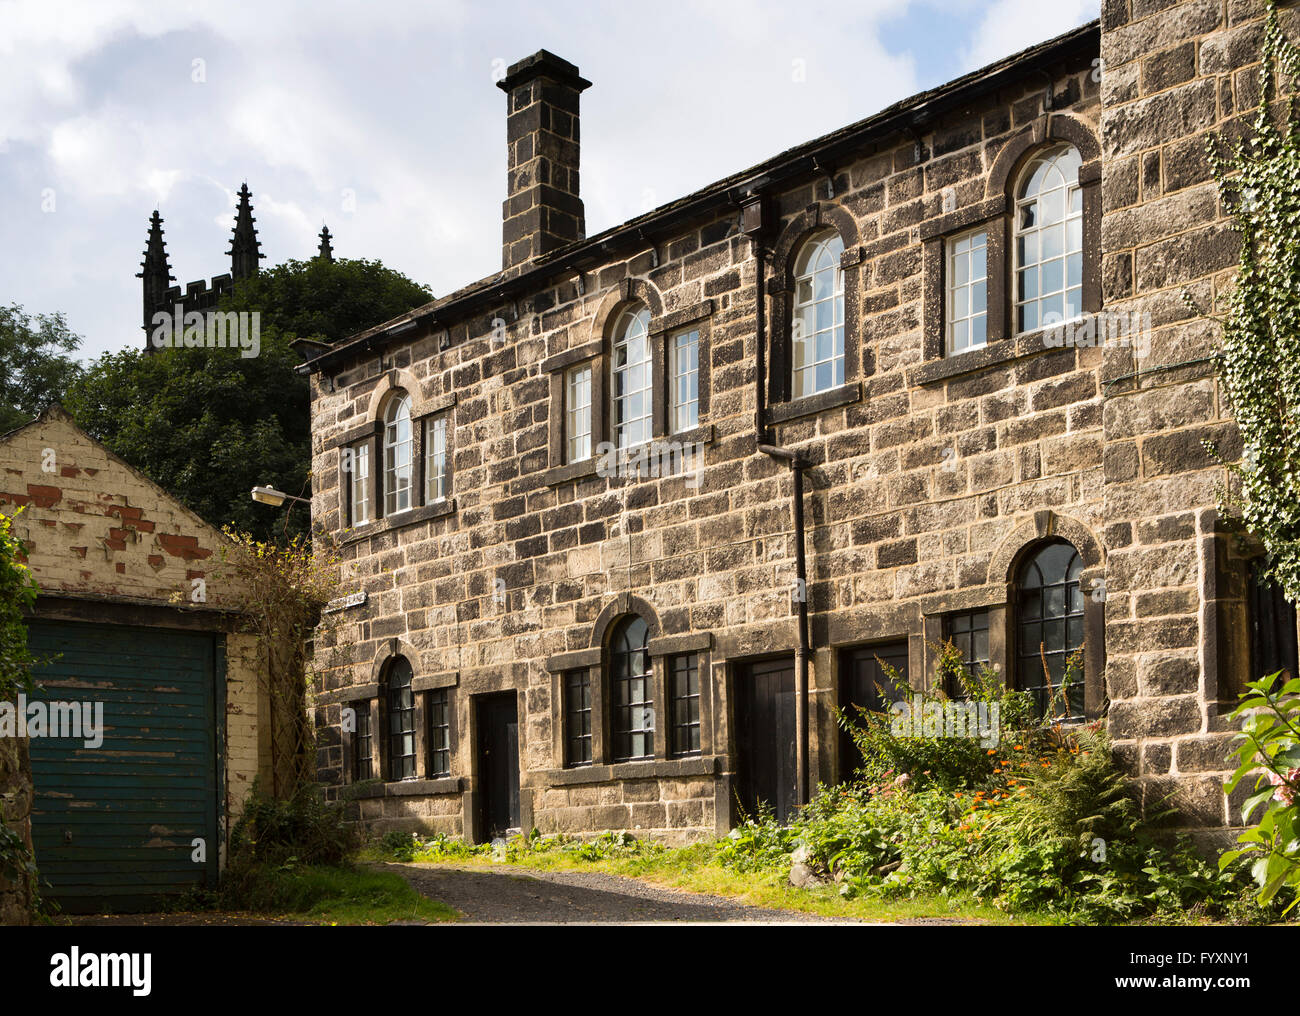 UK, England, Yorkshire, Calderdale, Heptonstall, Church Lane, cottages with unusual arched stone windows Stock Photo